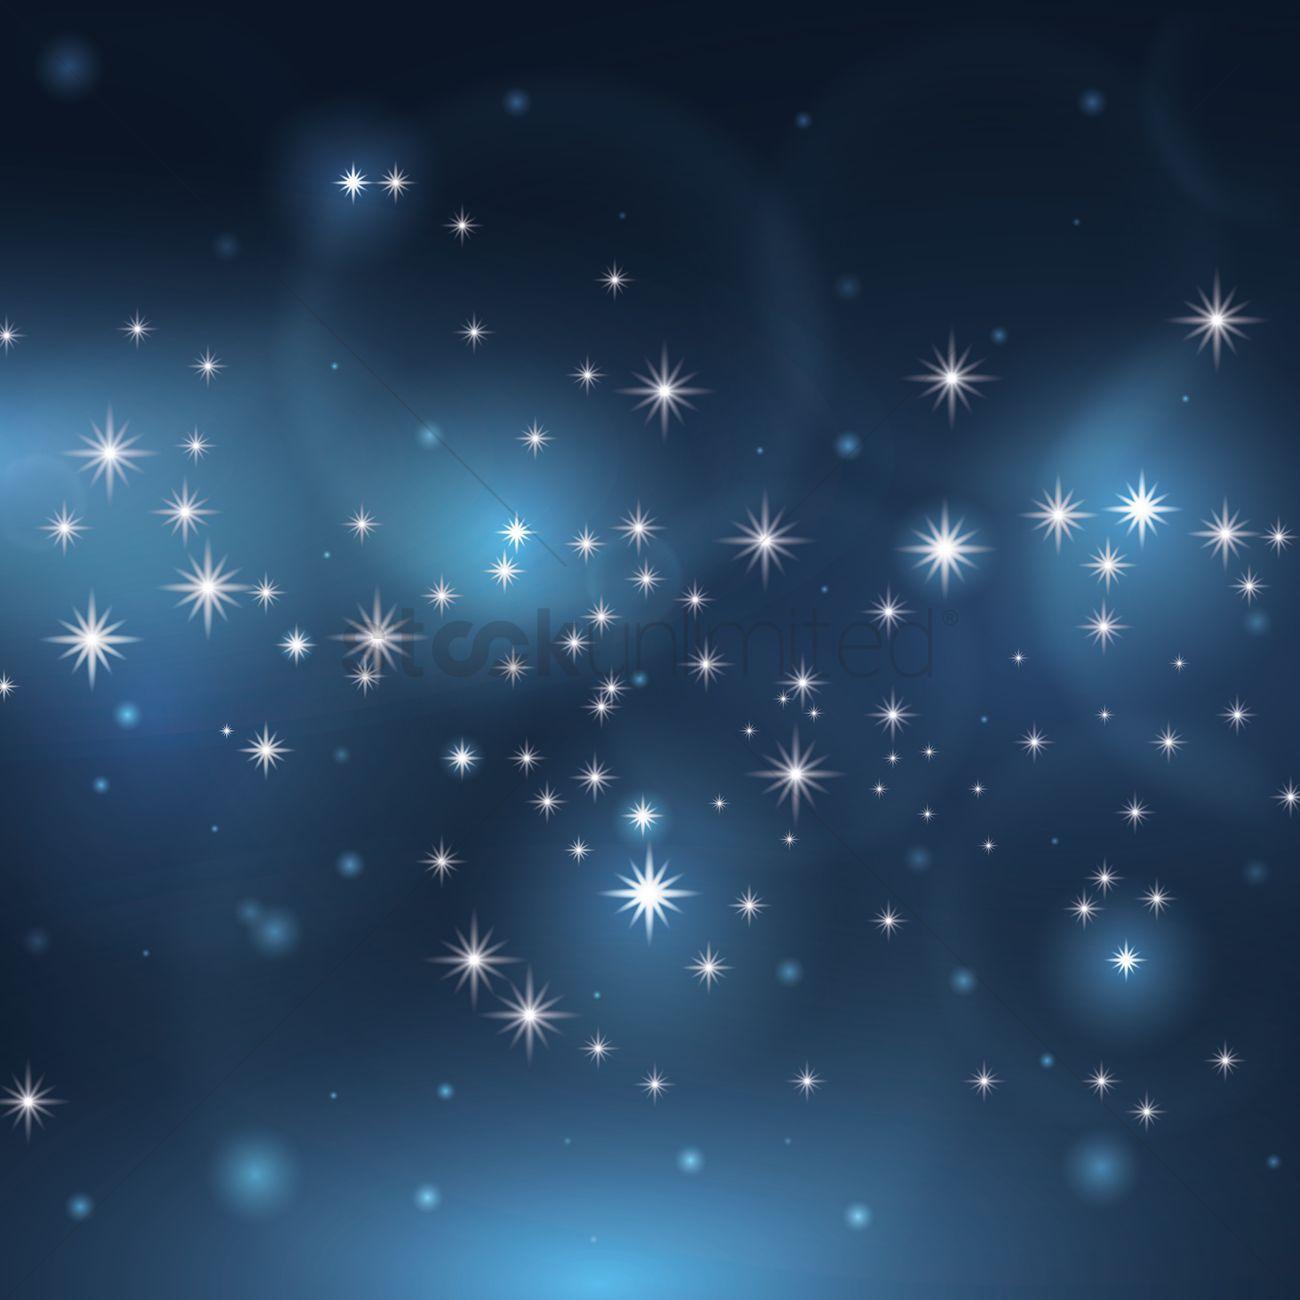 Starry sky background Vector Image